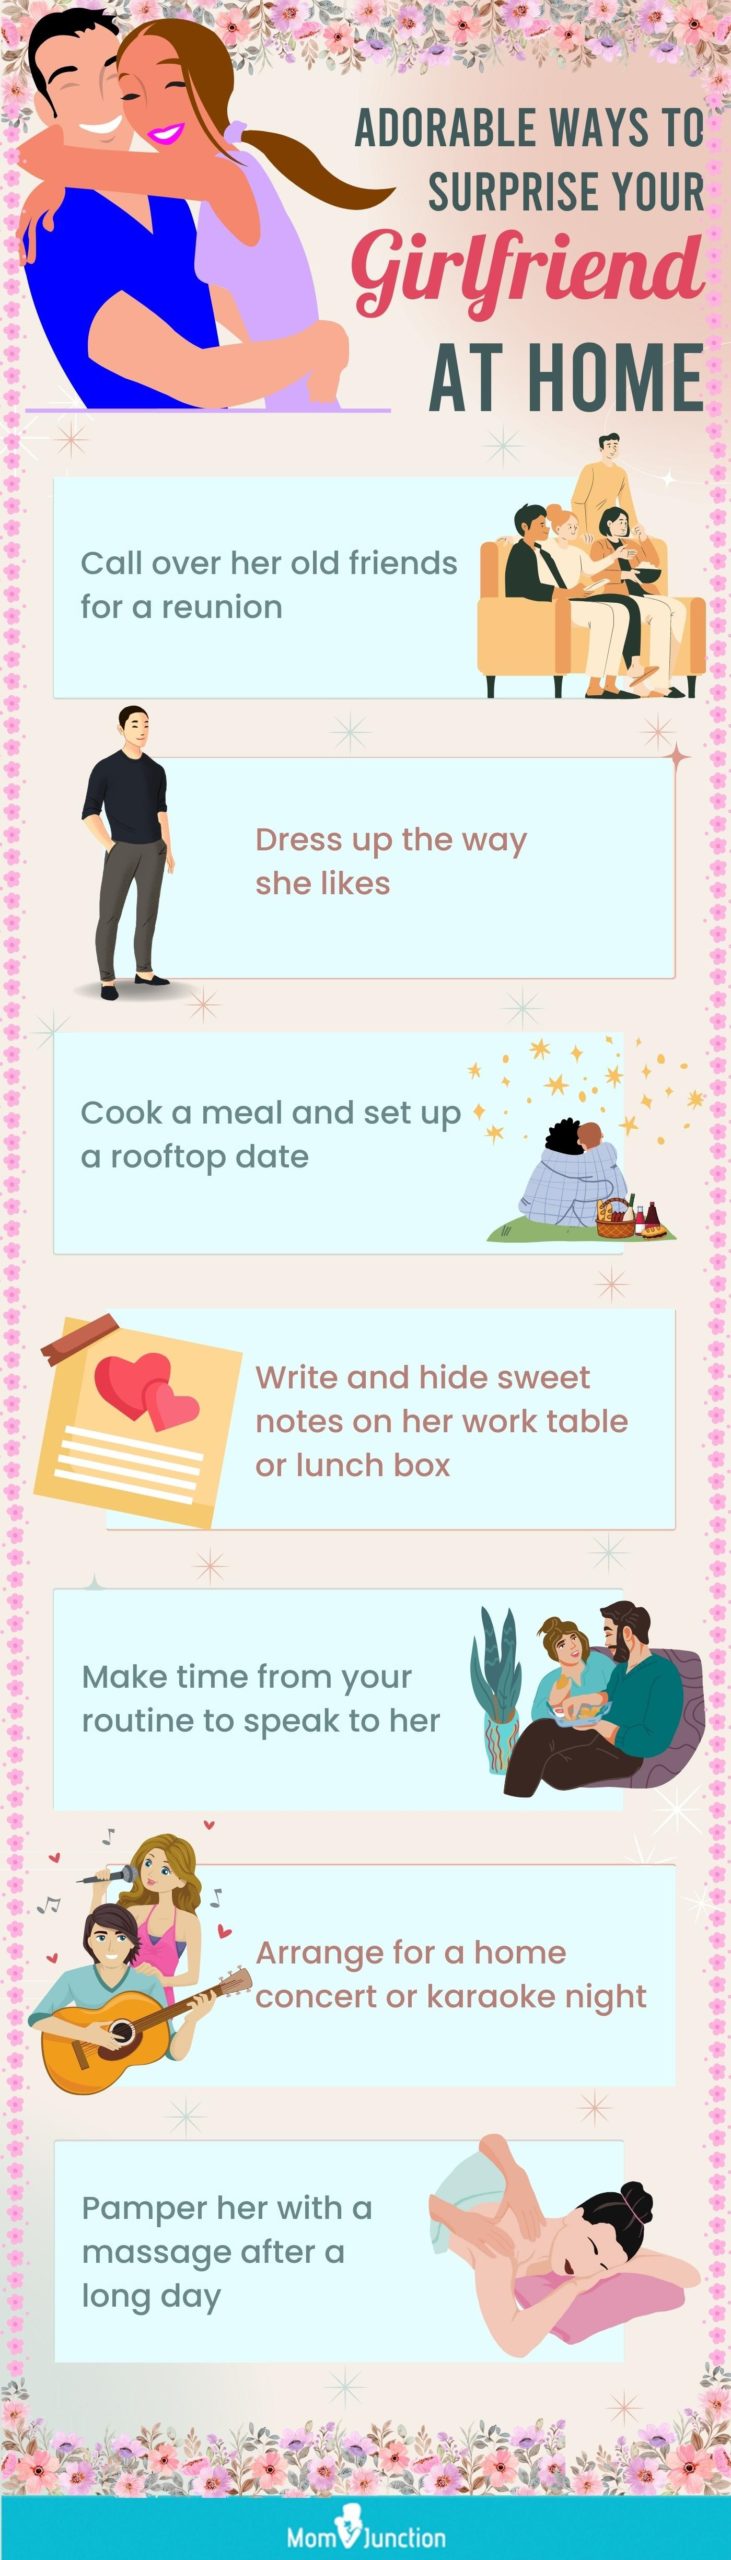 ways to surprise your girlfriend [infographic]